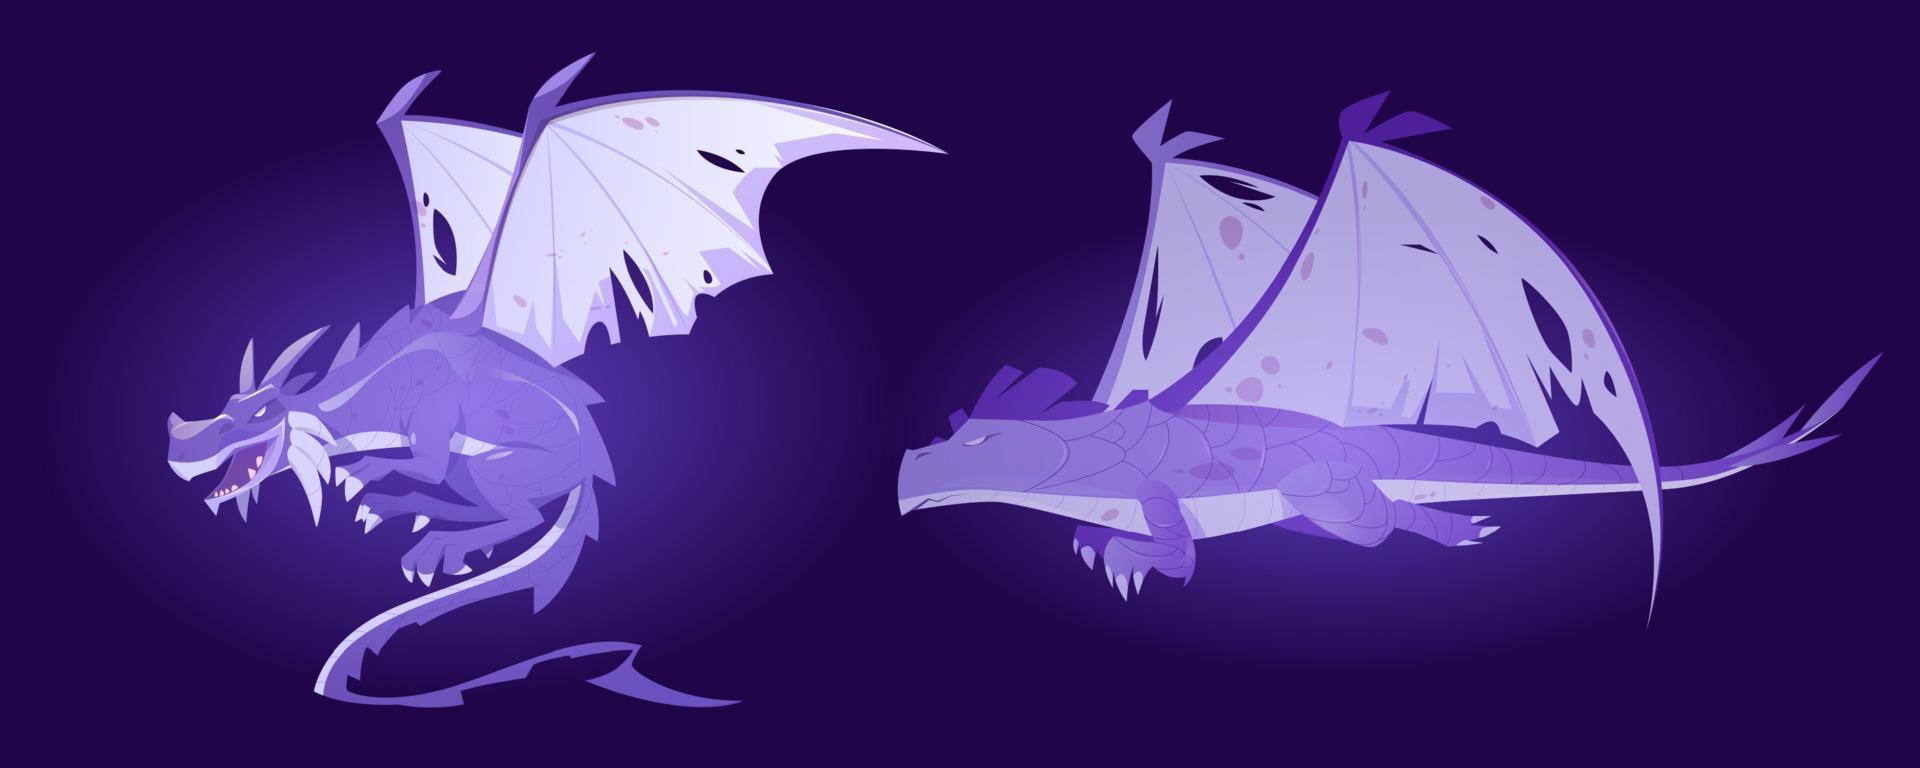 Fairy tale dragon ghosts, spirits of magic monster vector